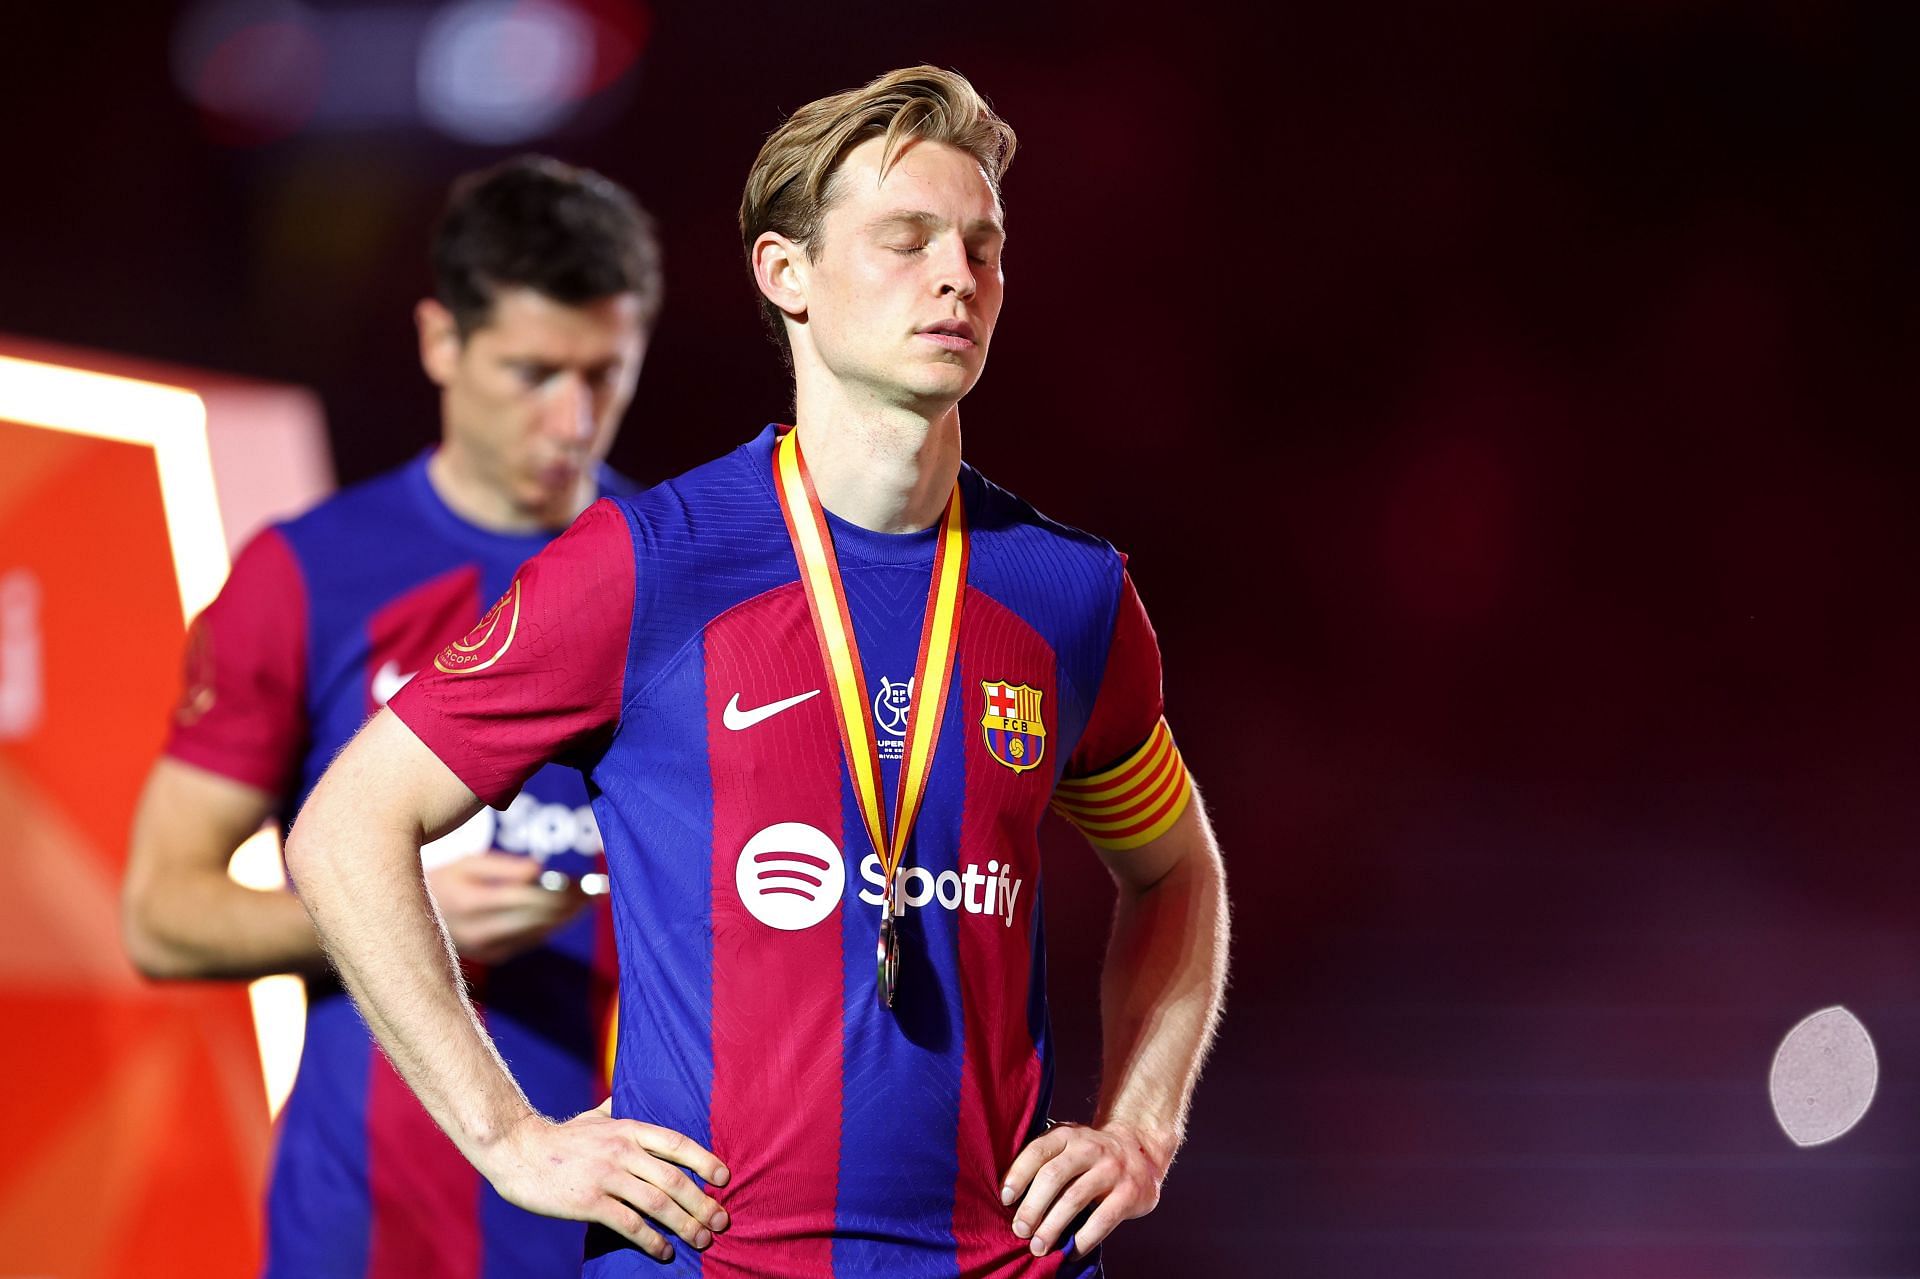 Frenkie de Jong’s time at the Camp Nou could be coming to an end.